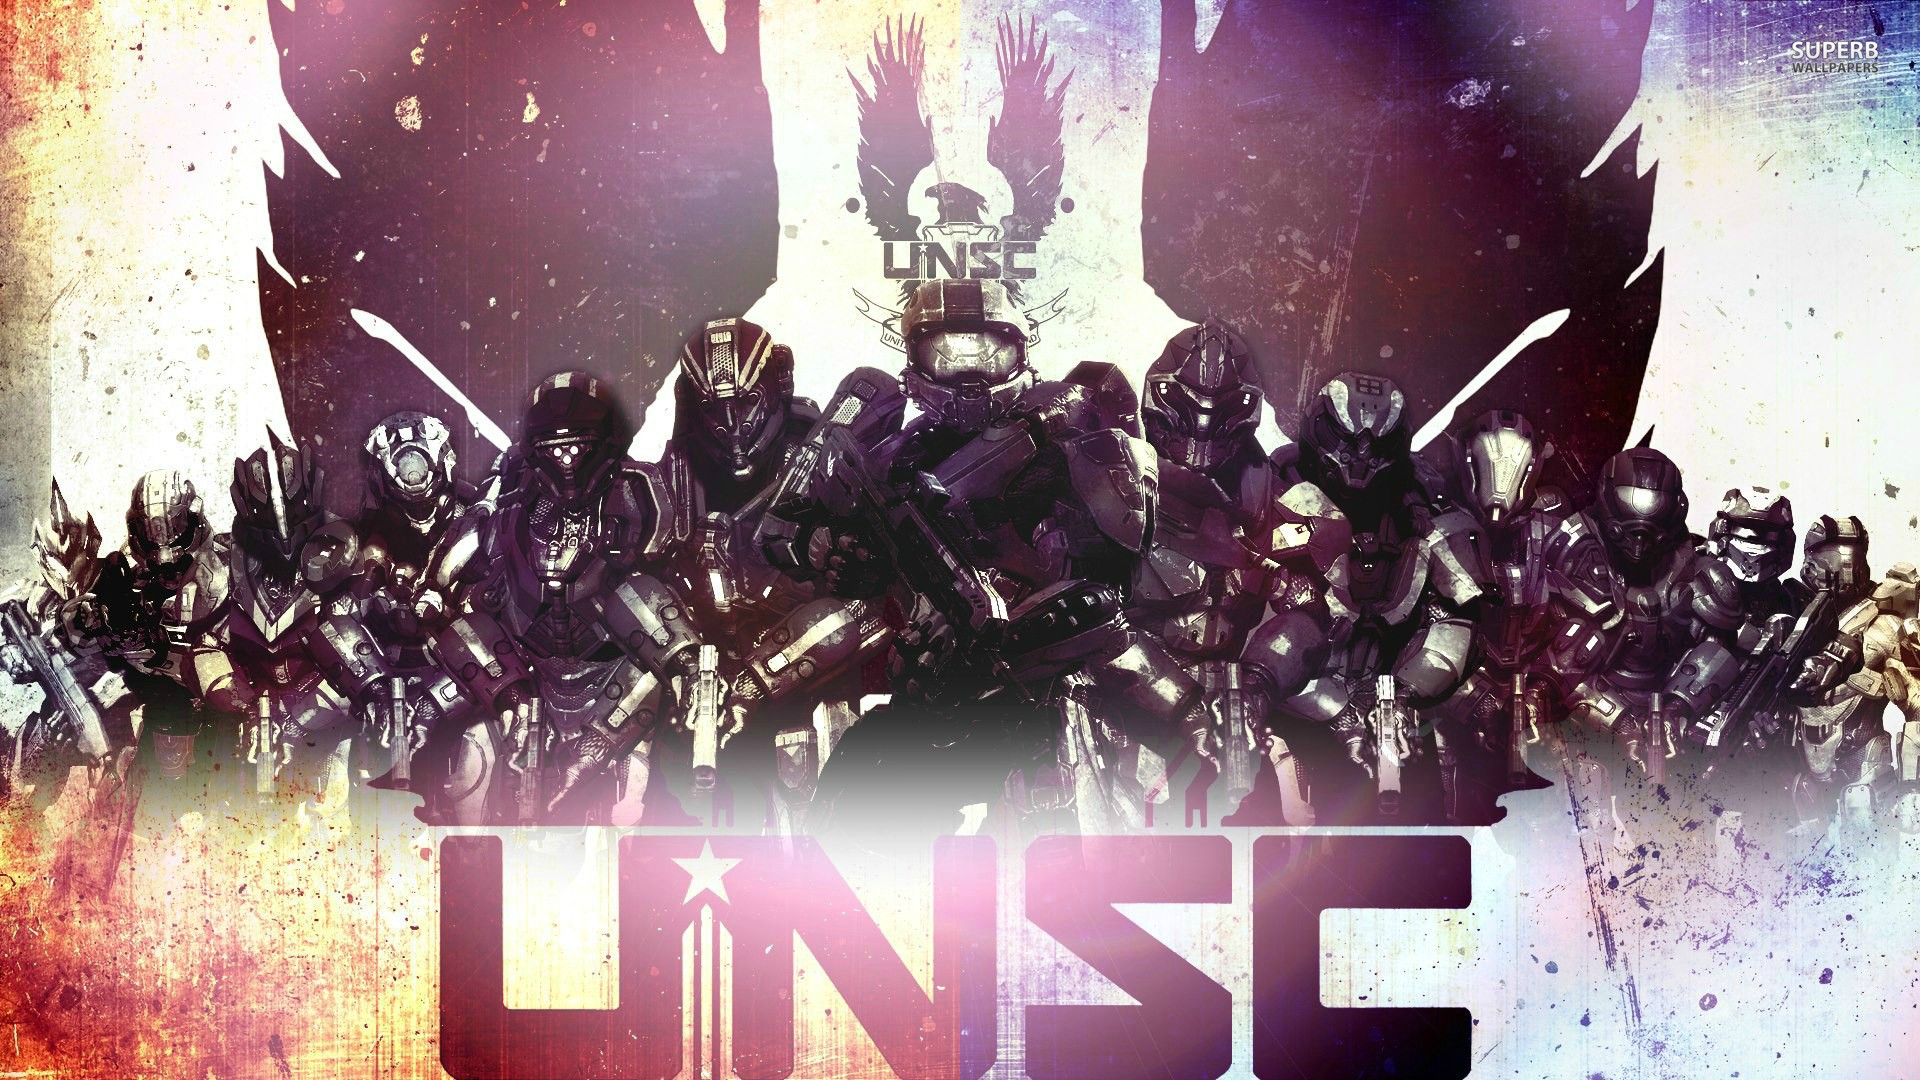 General 1920x1080 video games UNSC Infinity Halo 4 343 Industries UNSC military Spartans (Halo) video game art science fiction Master Chief (Halo) armor video game characters